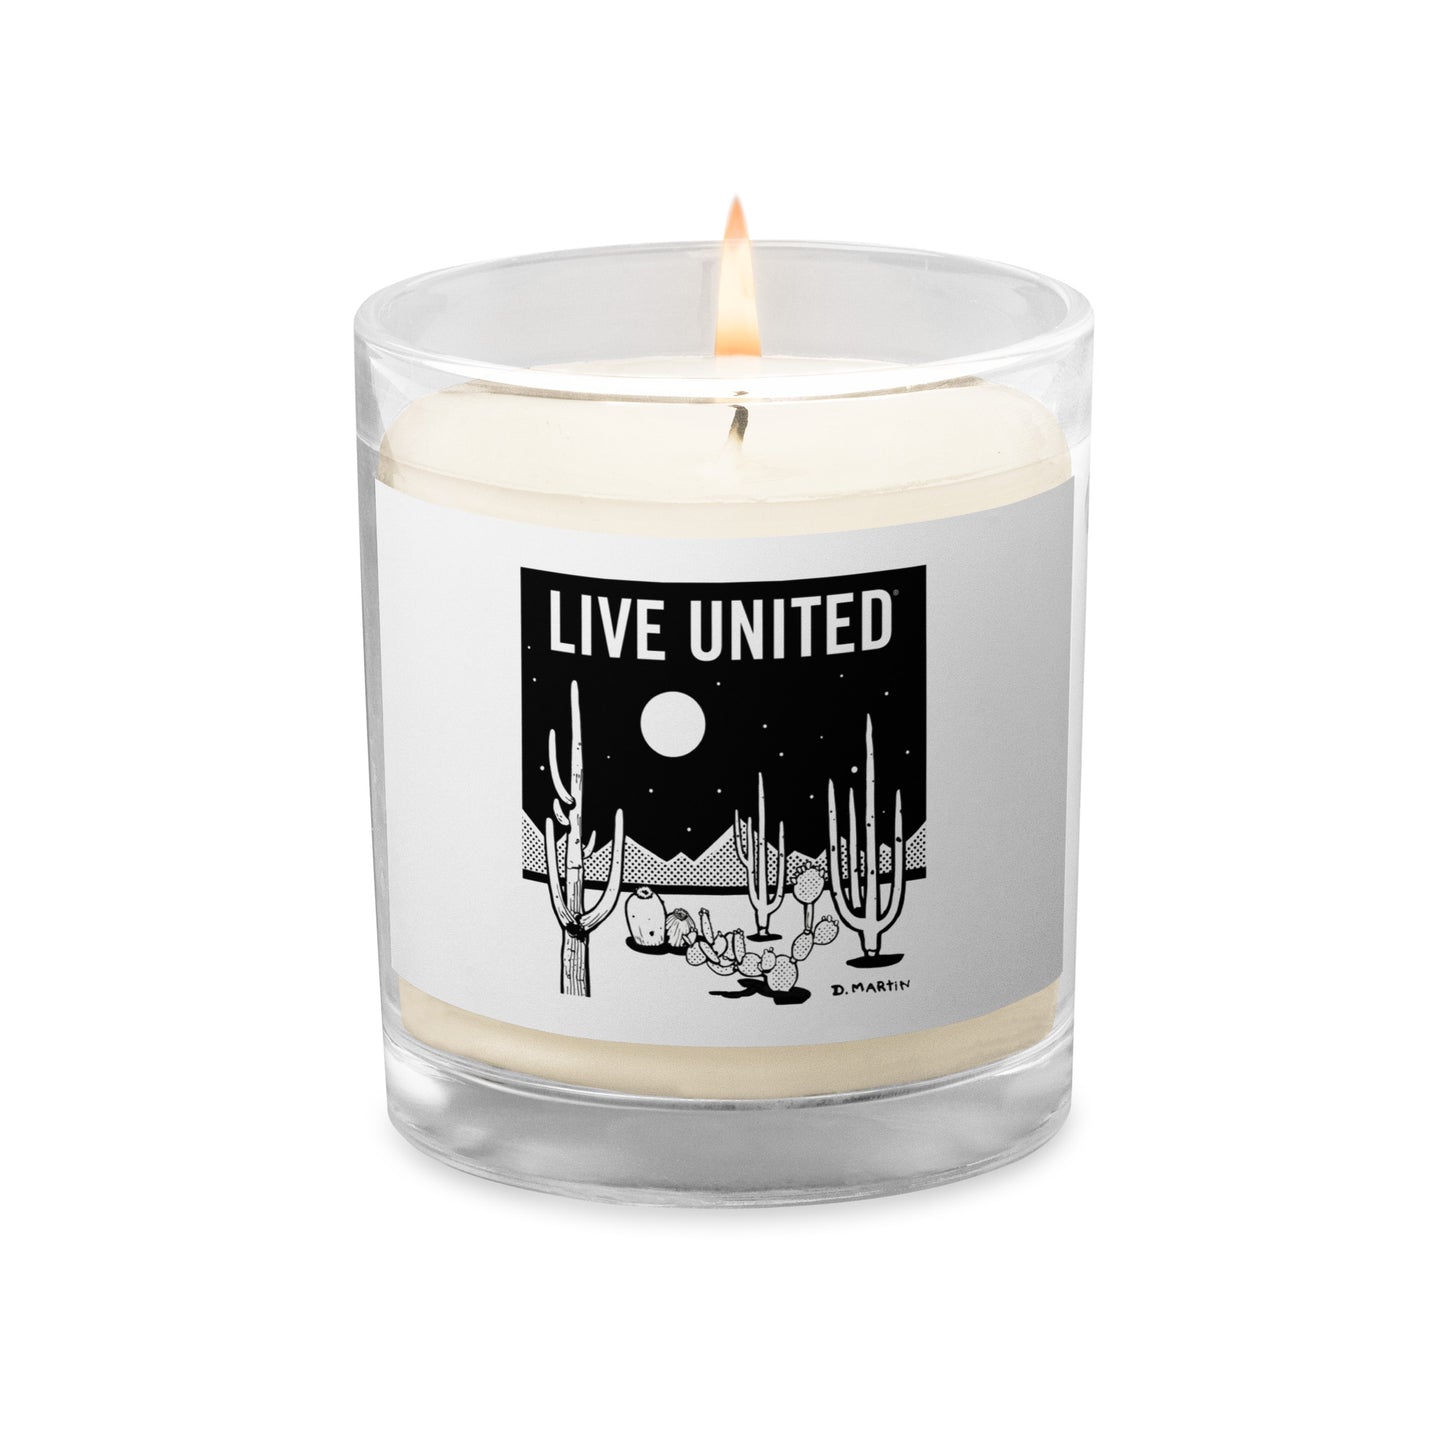 Danny Martin Live United Glass jar soy wax candle